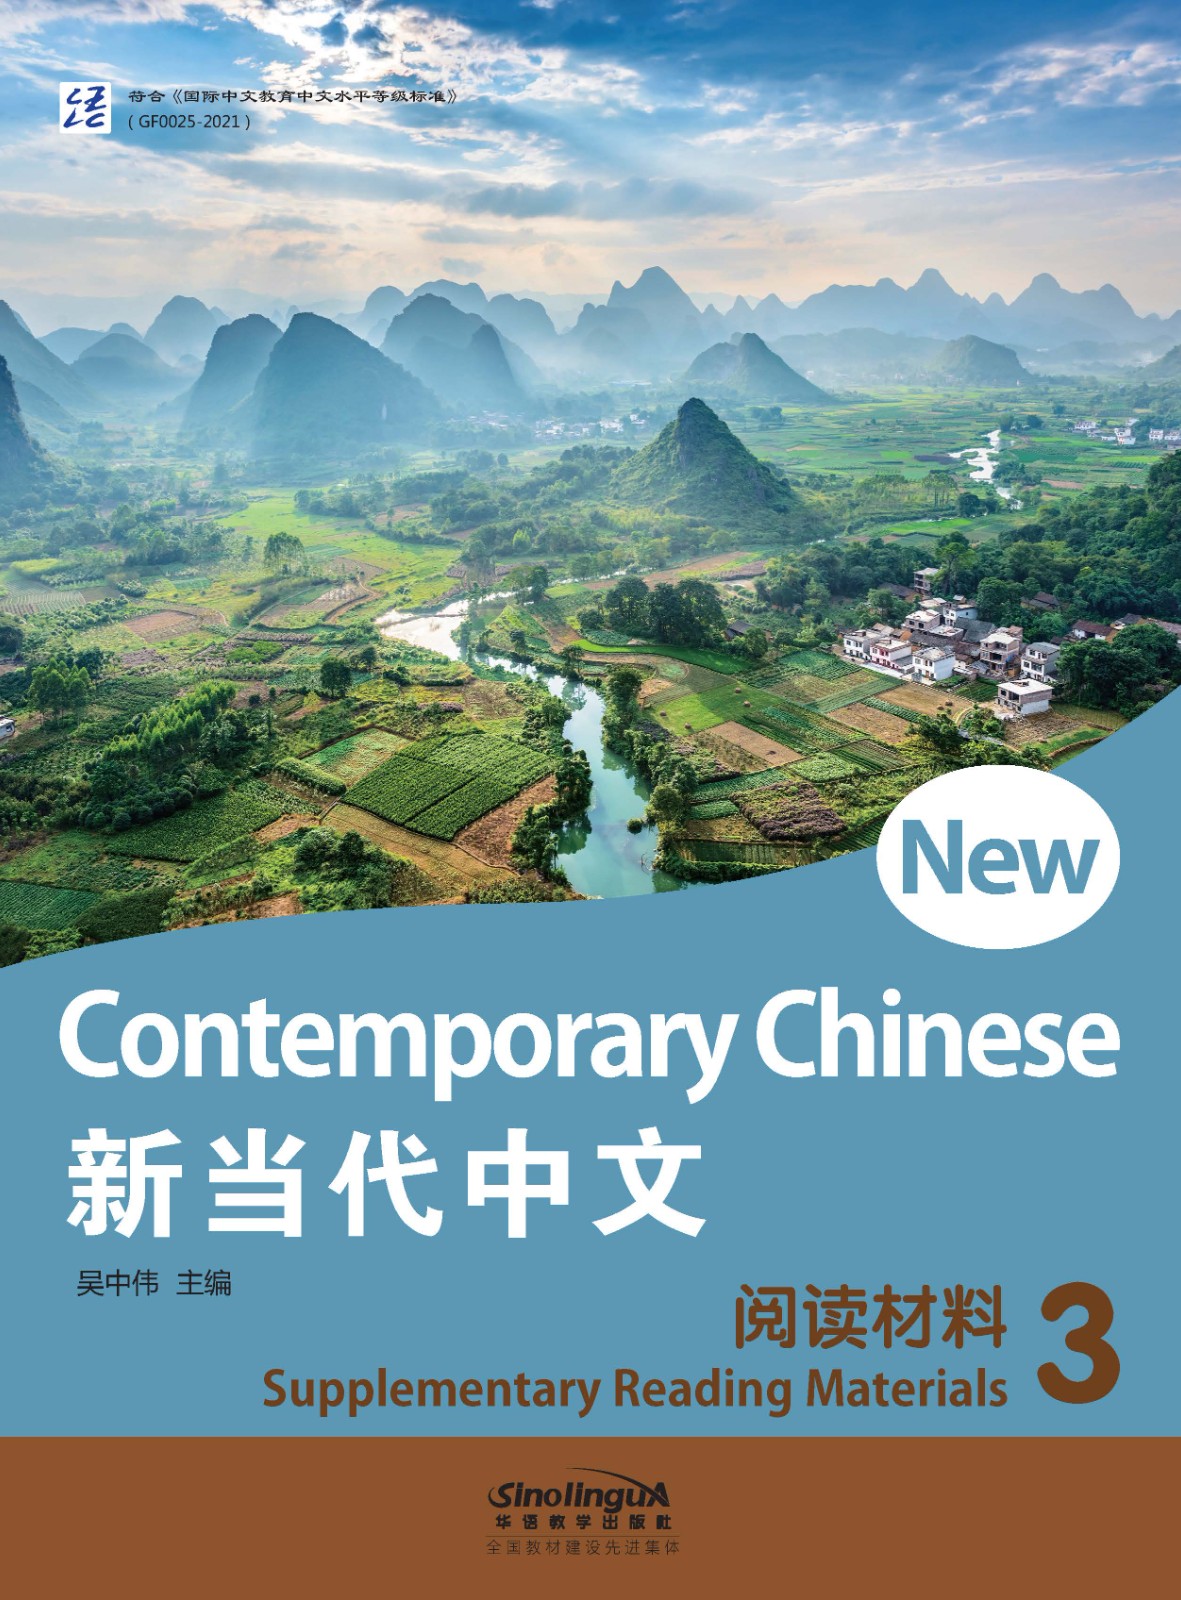 New Contemporary Chinese--Supplementary Reading Materials 3